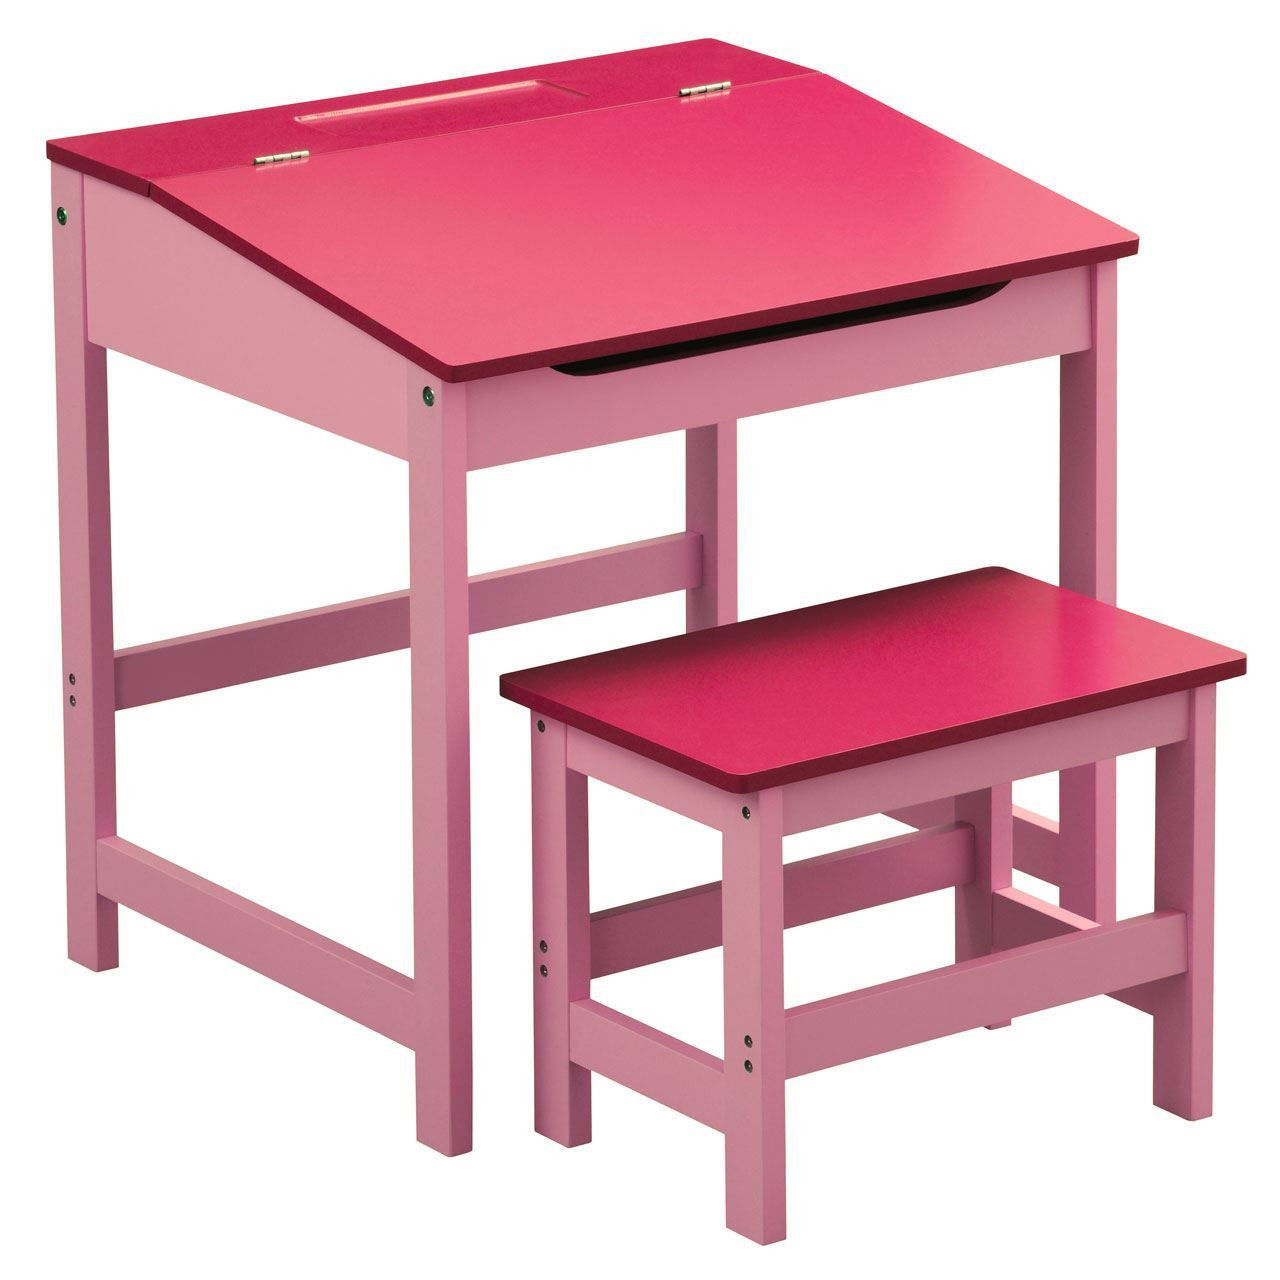 Kids Desk And Chair
 STUDY DESK AND CHAIR SET School Drawing Homework Table